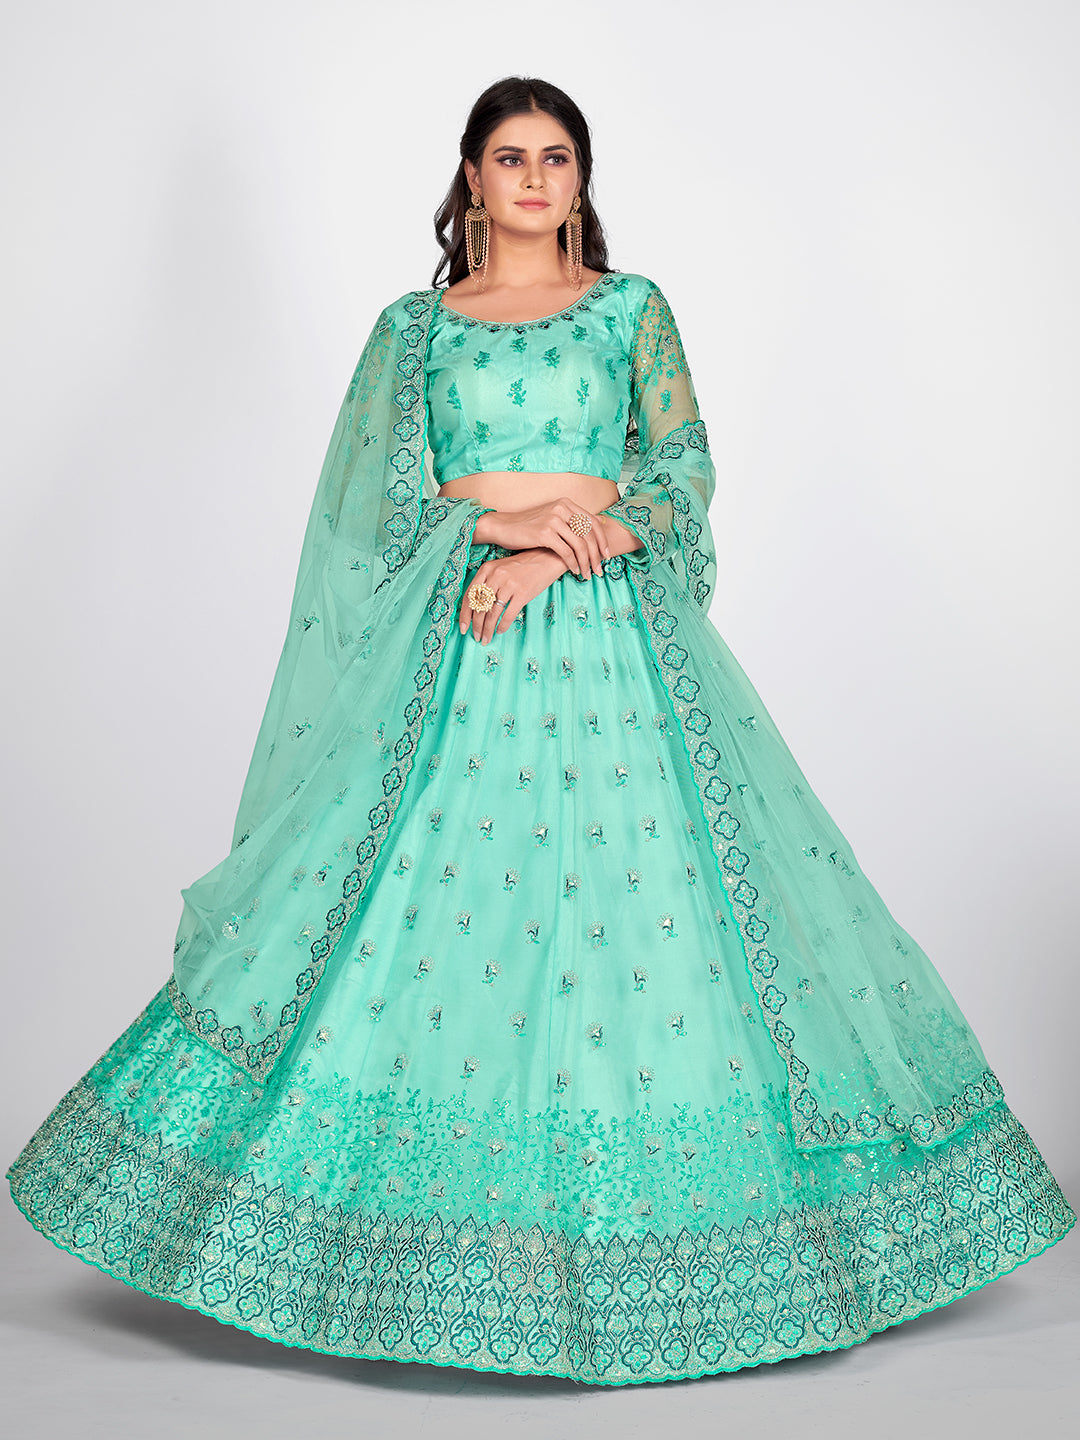 Most Famous Turquoise Blue and Green Embroidered Sangeet Special Lehenga and Blouse With Dupatta